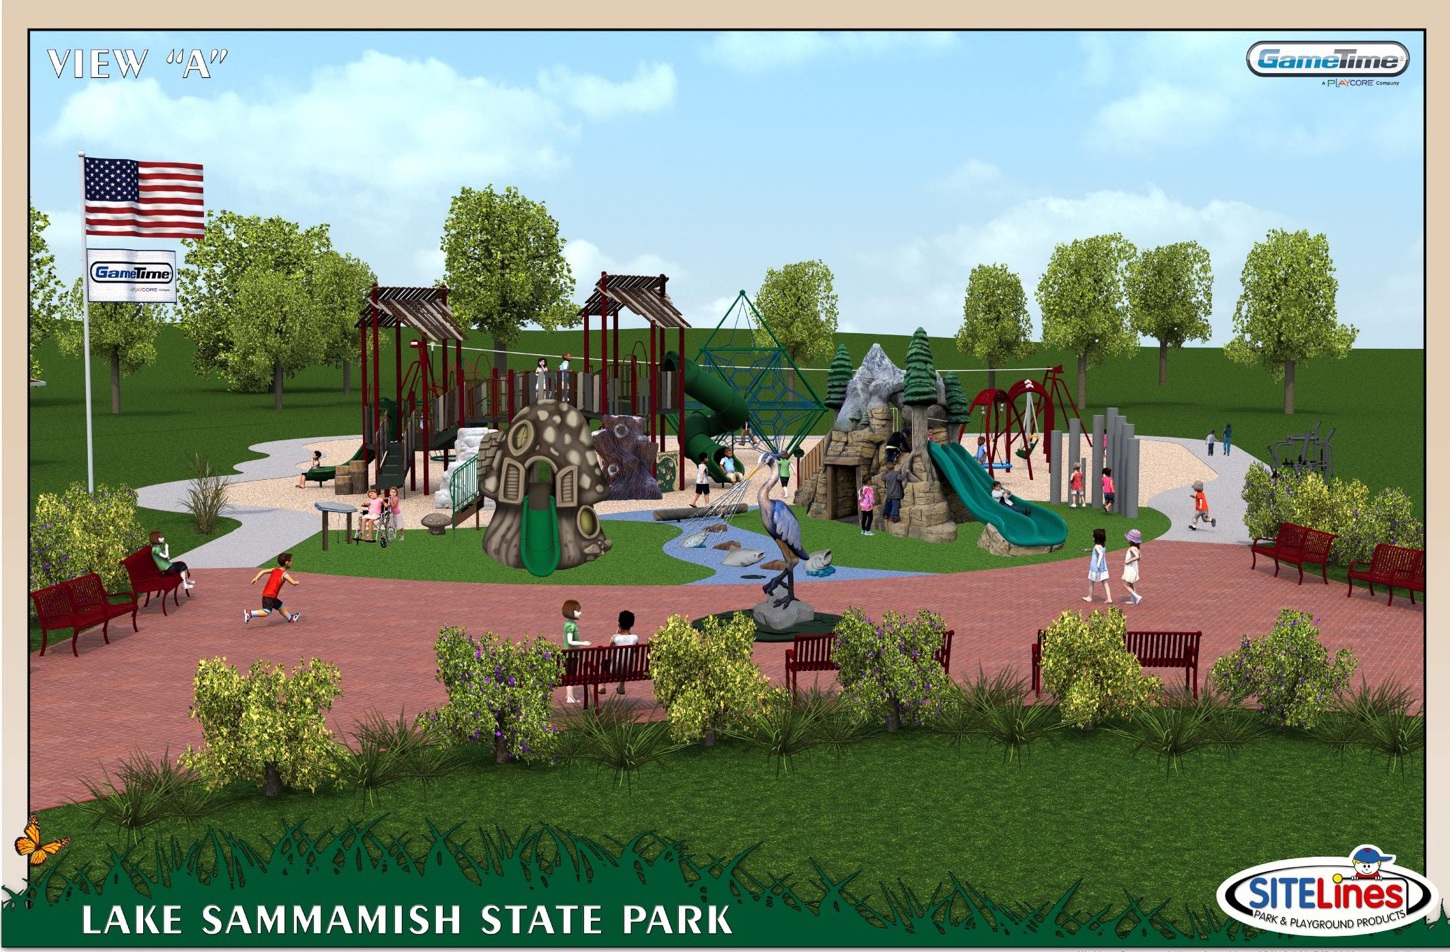 Volunteers are needed for a community build at Lake Sammamish park (Image courtesy of Friends of Lake Sammamish State Park).